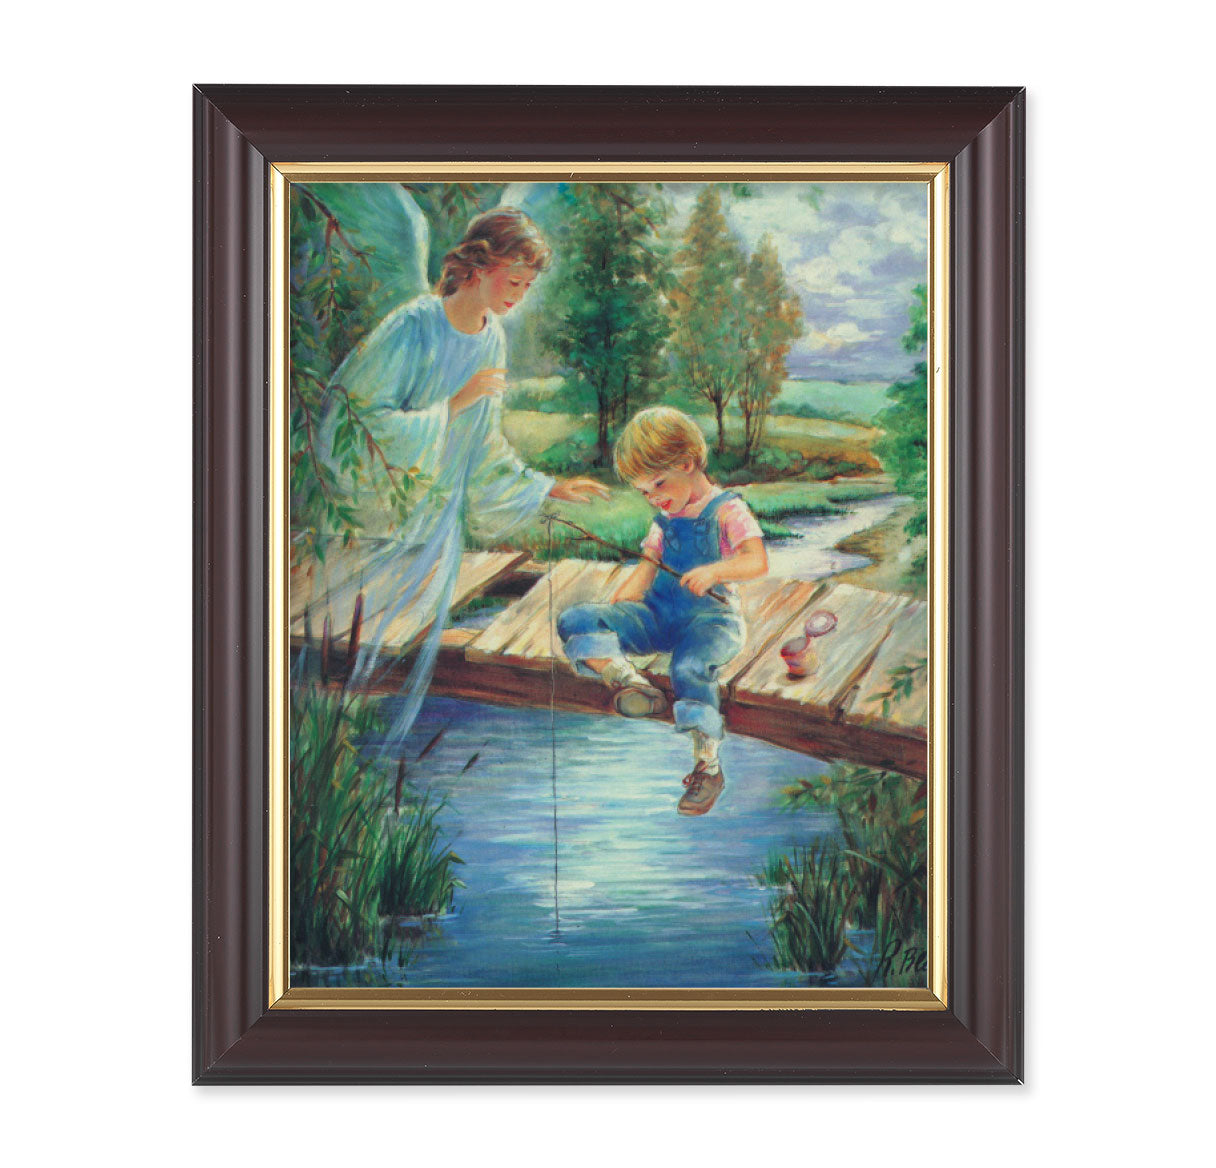 Guardian Angel with Boy Picture Framed Wall Art Decor Medium, Classic Fluted Dark Walnut Finished Frame with Gold-Leaf Lip